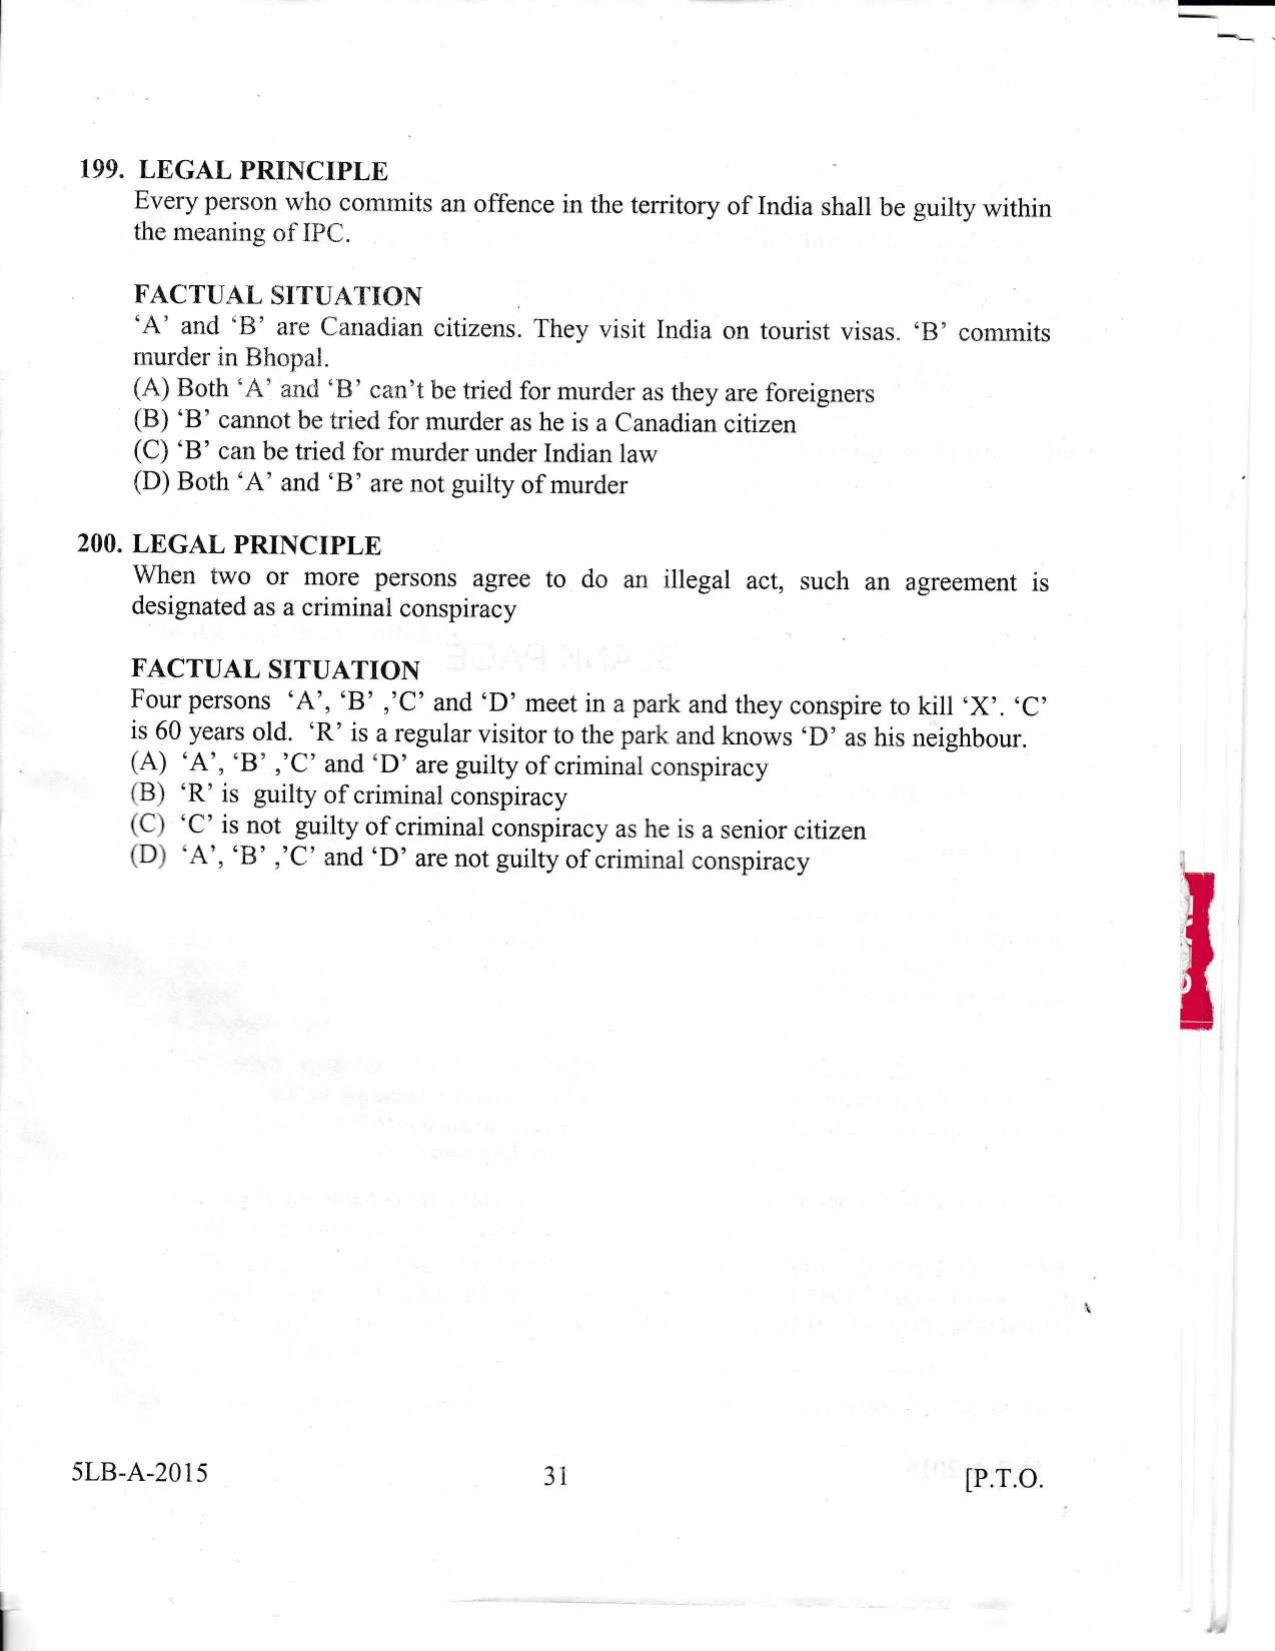 KLEE 5 Year LLB Exam 2015 Question Paper - Page 31